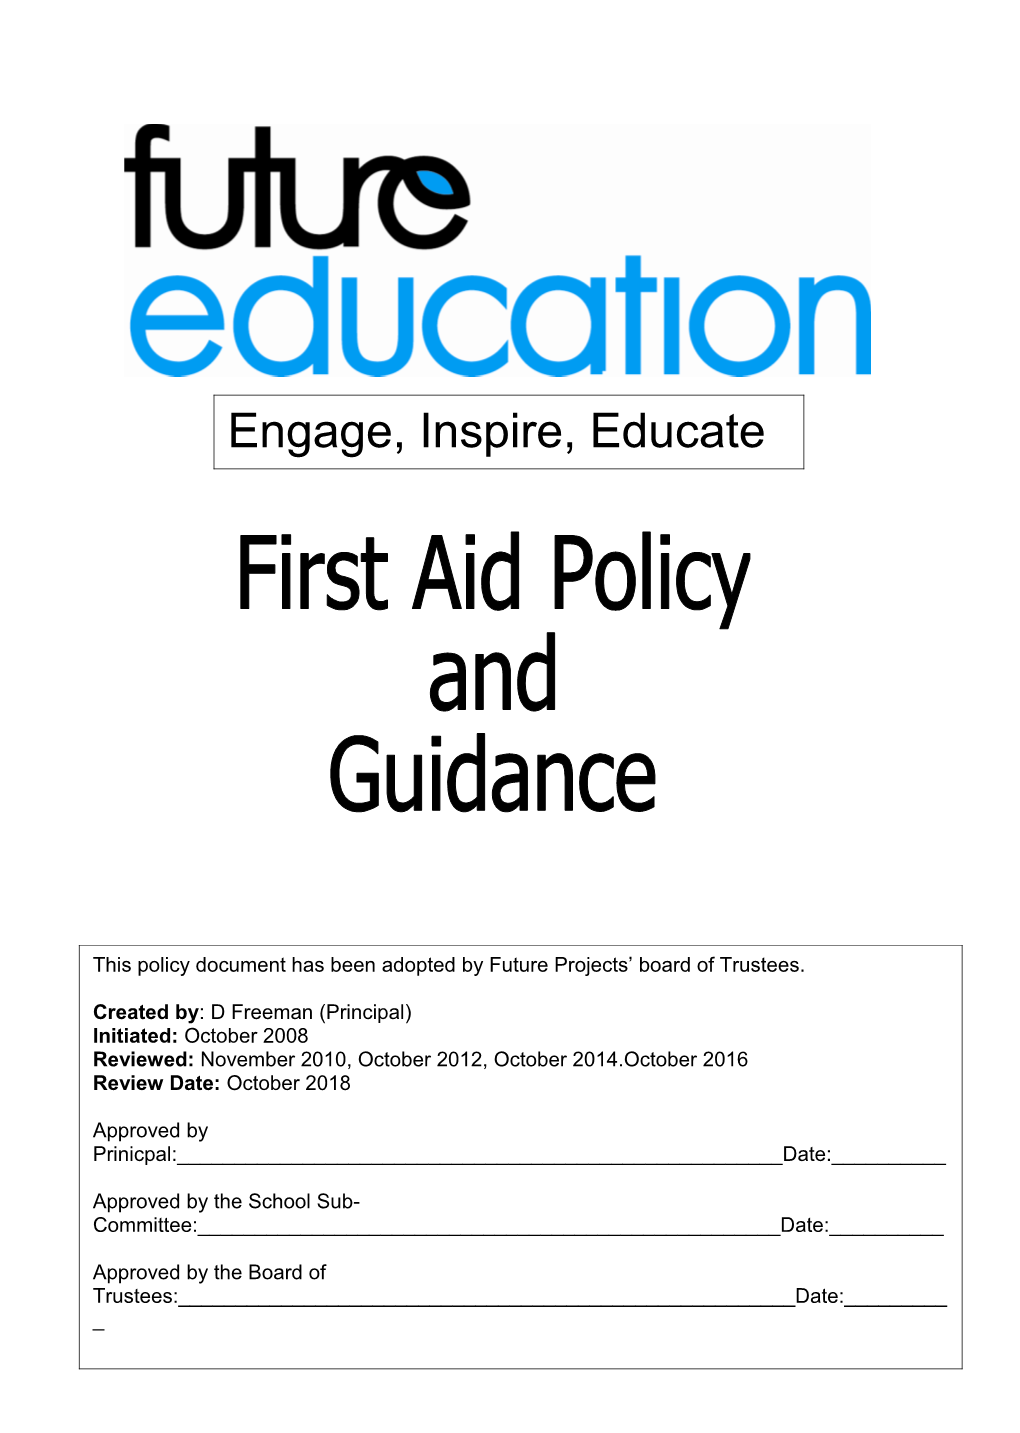 FIRST AID POLICY and GUIDANCE